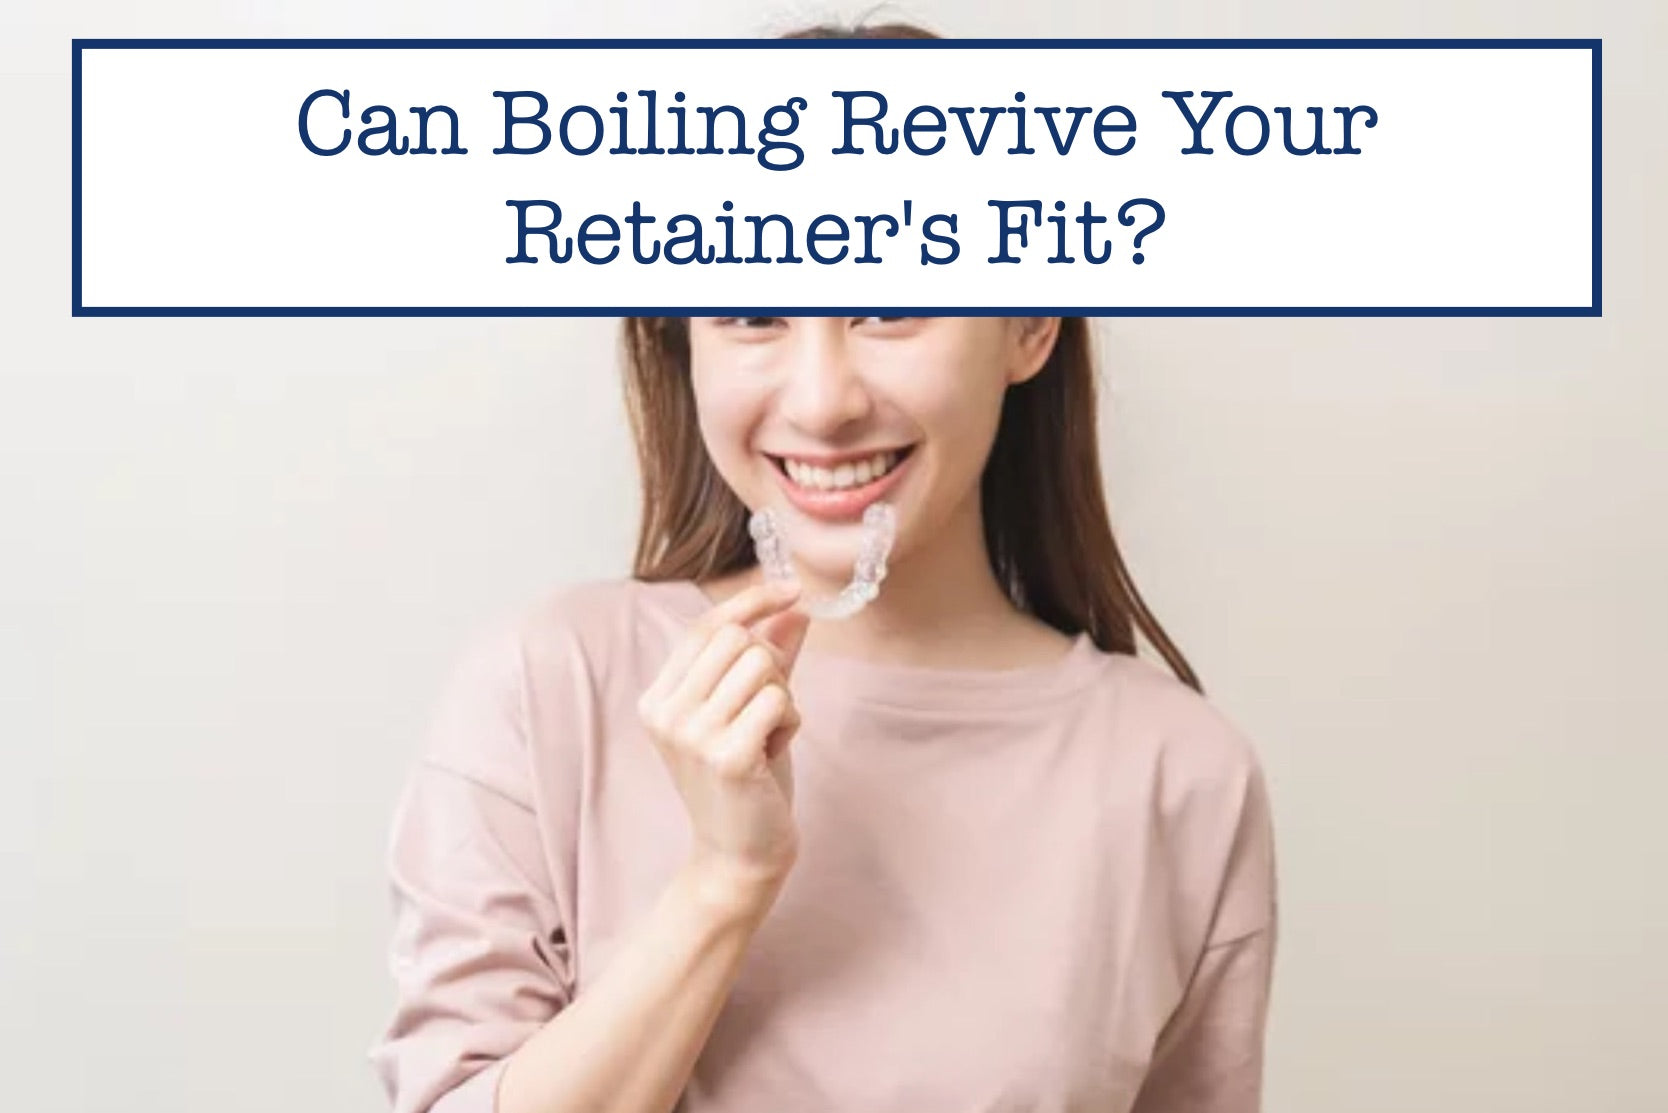 Can Boiling Revive Your Retainer's Fit?